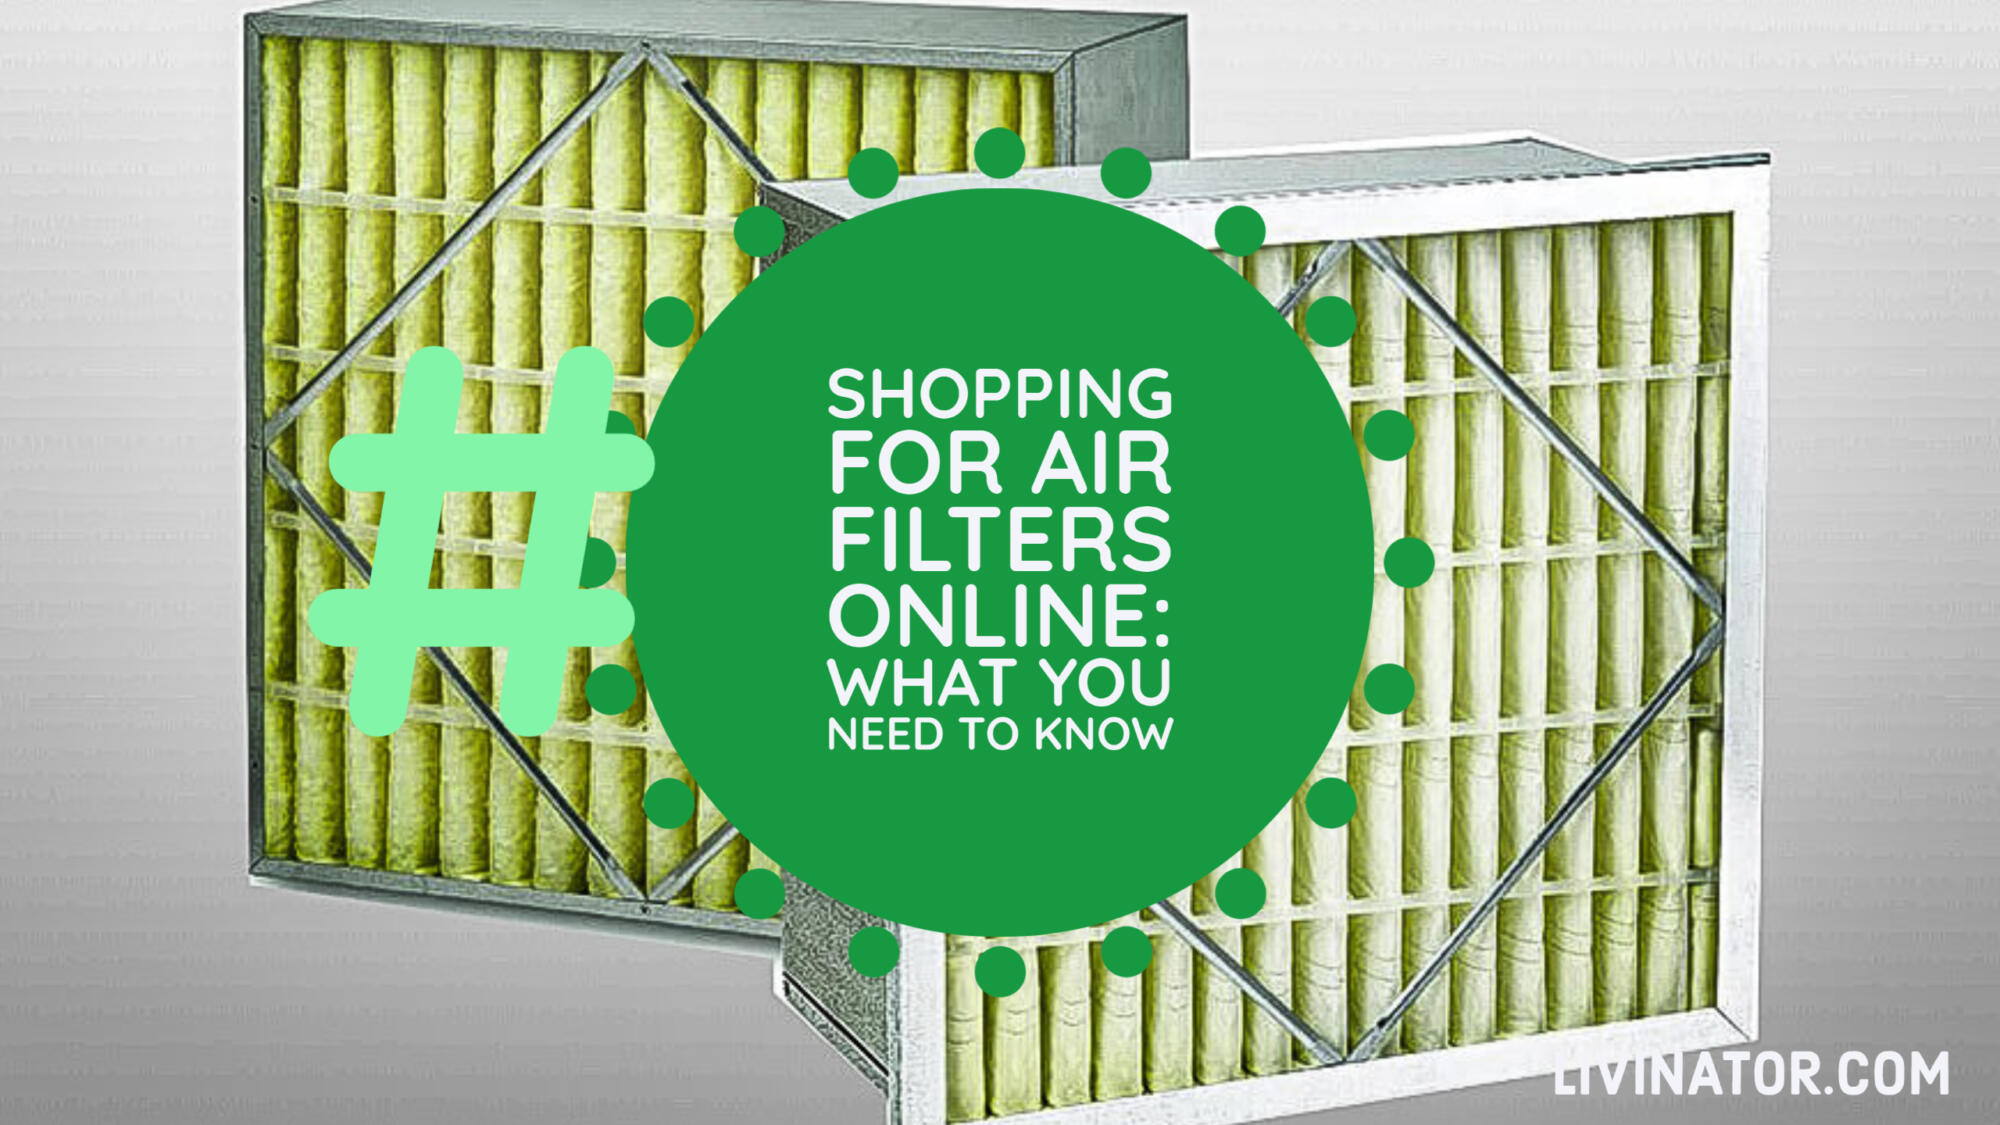 Air Filters Online: What You Need To Know for Shopping.